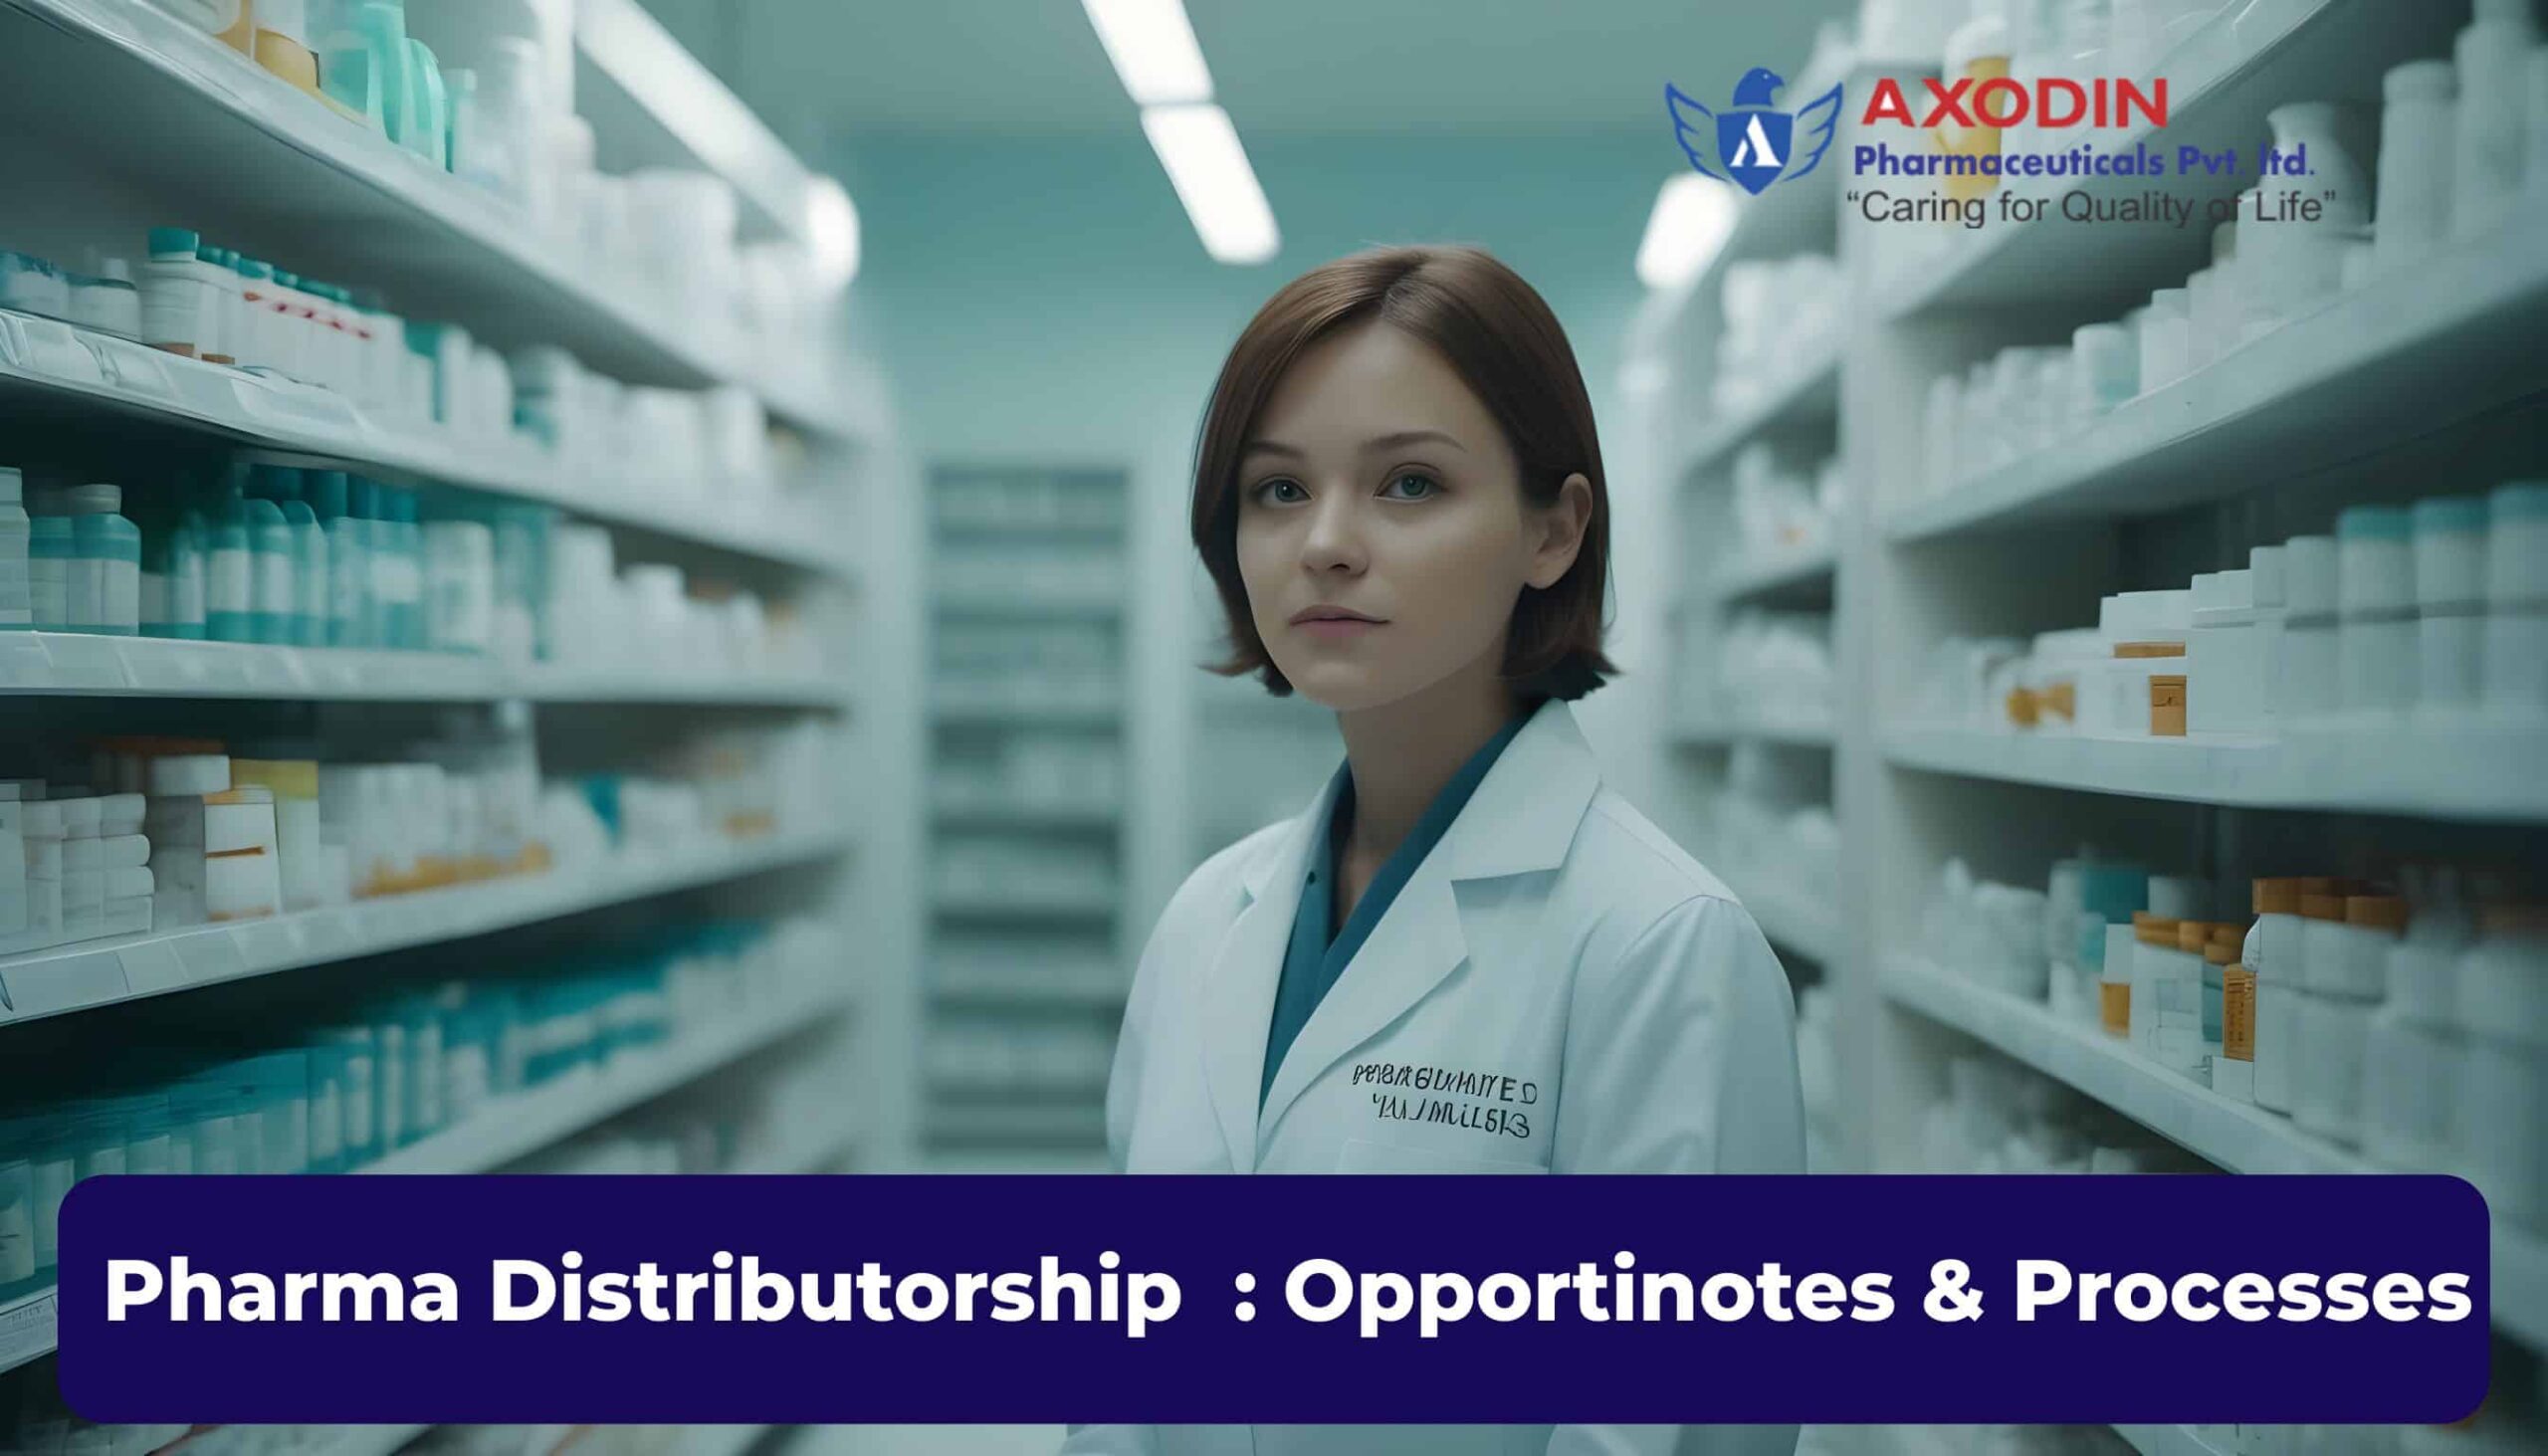 Pharma Distributorship: Opportunities and Processes - Axodin Pharmaceuticals